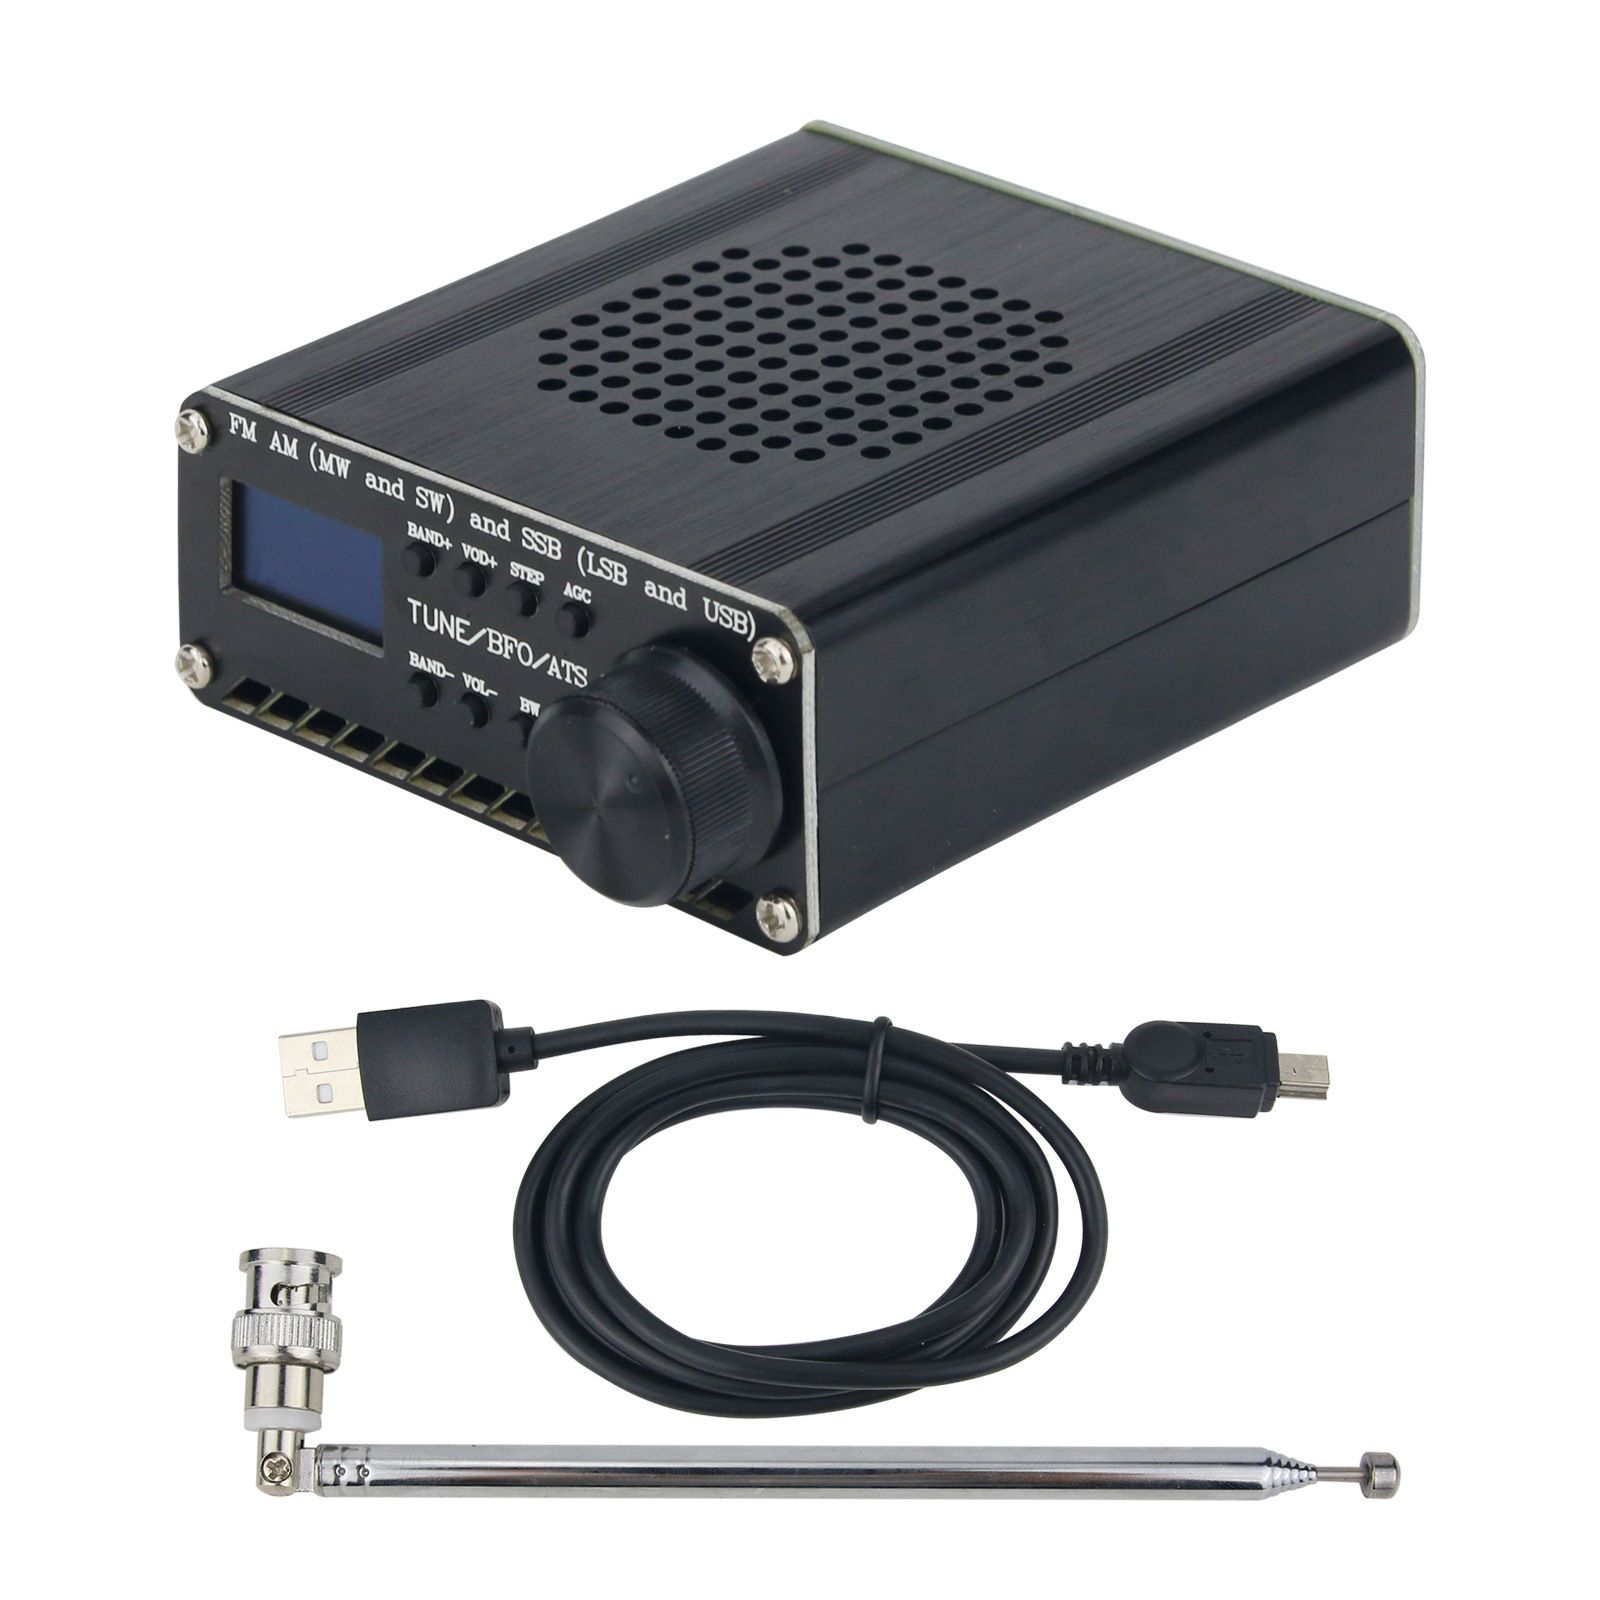 SI4732-All-Band-Radio-FM-AM-MW-And-SW-And-SSB-LSB-And-USB-With-Antenna-Lithium-Battery-Speaker-1816774-5